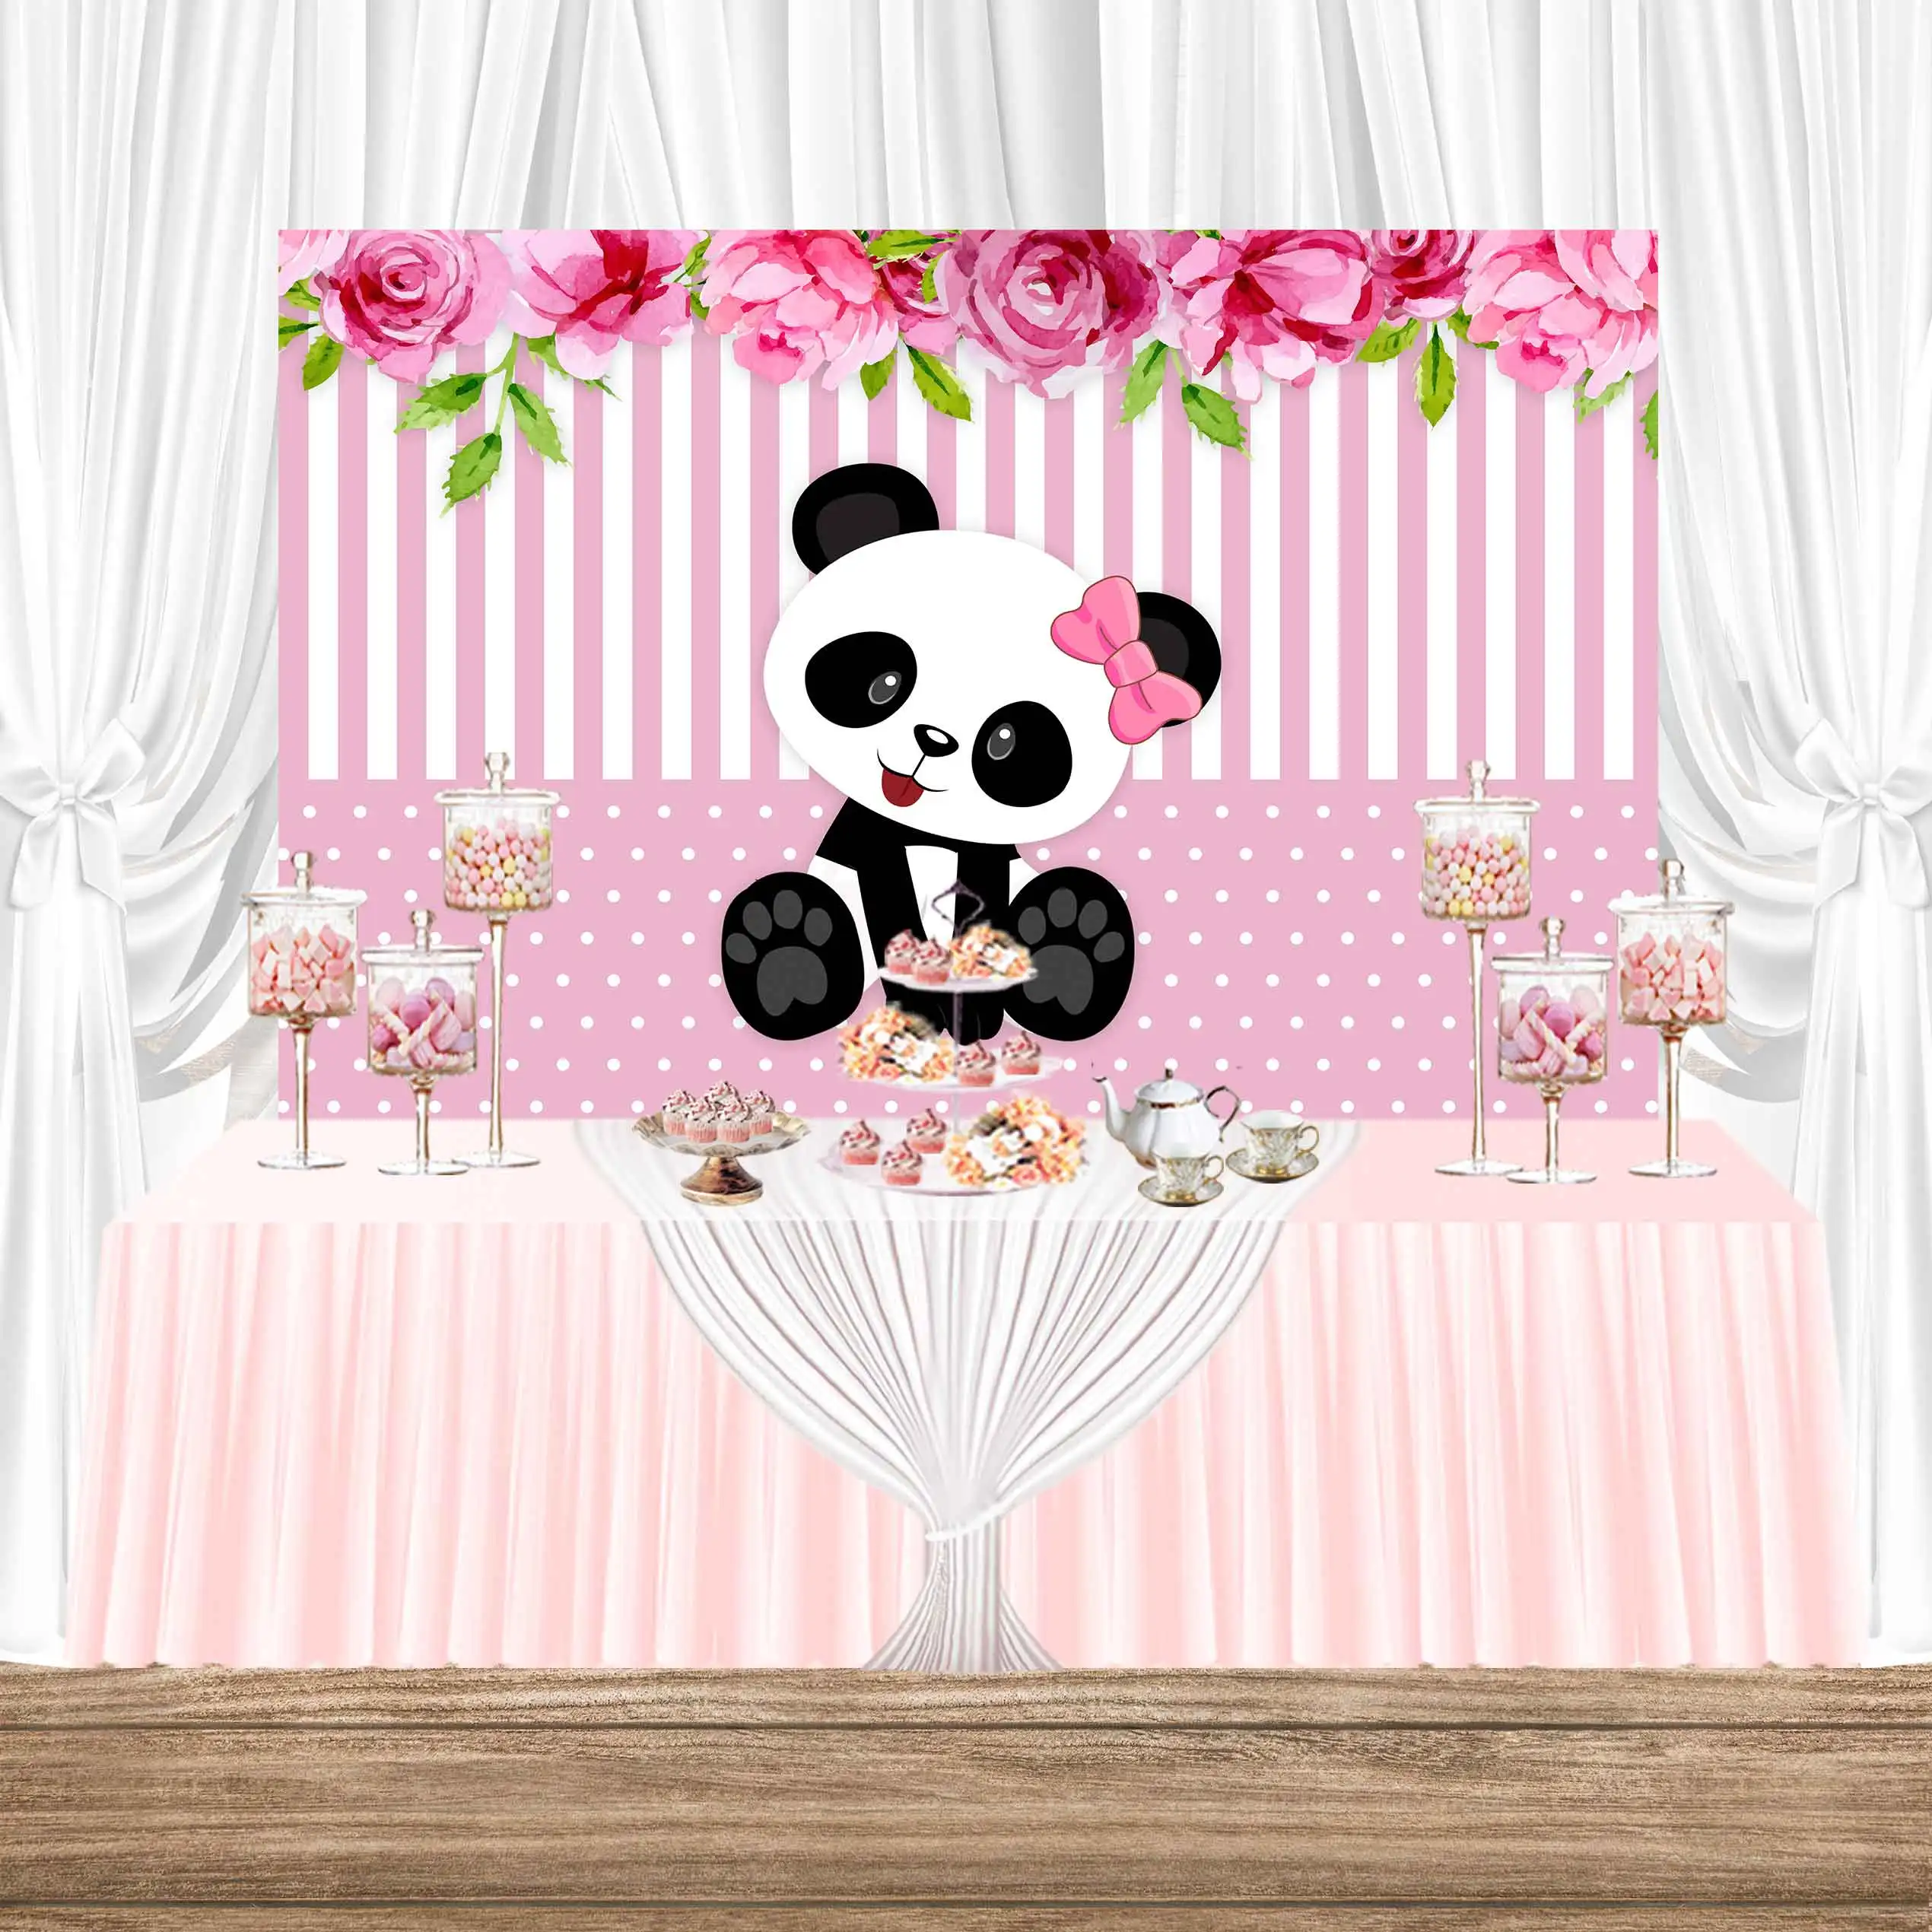 NeoBack Birthday Photography Party Photo Backdrop Baby Bamboo Pink Flowers Cute Animal Panda Background Children Backdrop